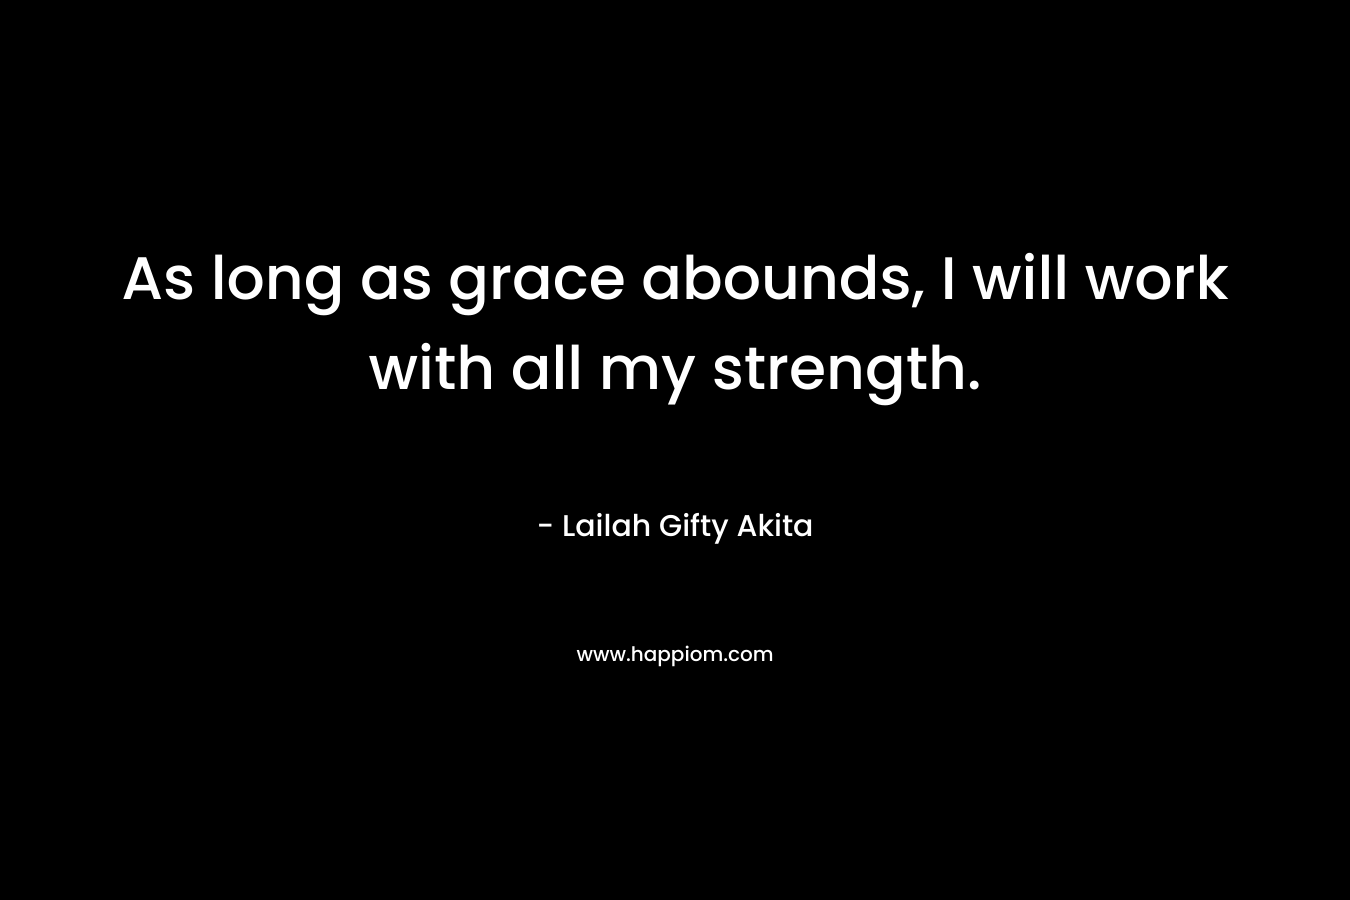 As long as grace abounds, I will work with all my strength. – Lailah Gifty Akita